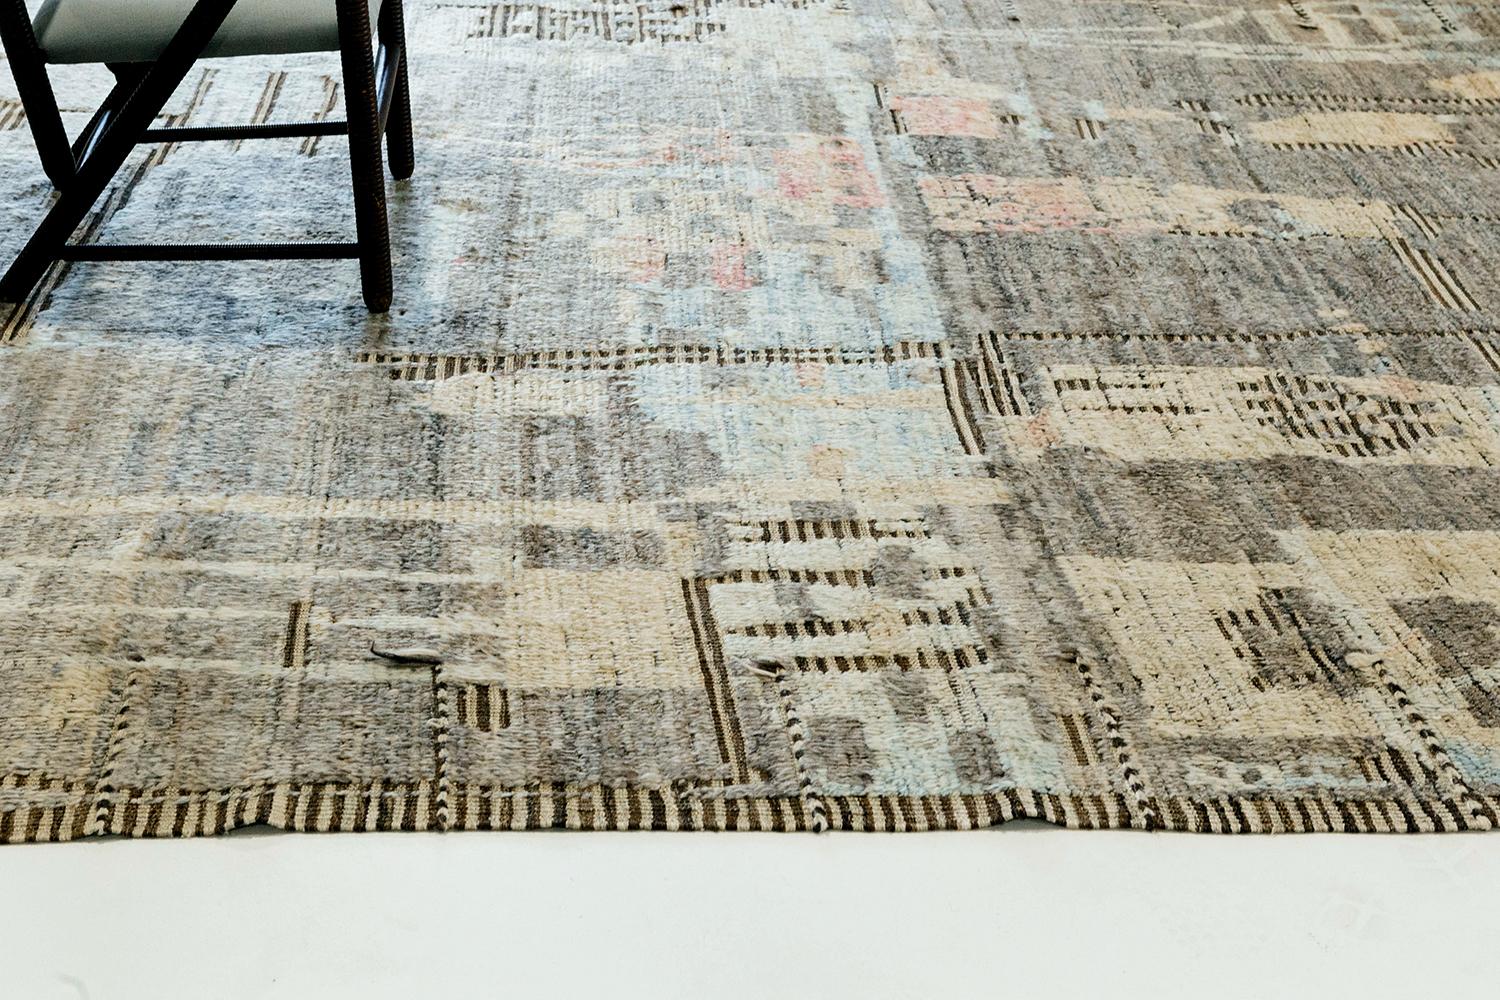 Meliska' is a beautifully textured rug with irregular motifs and stripped patterning inspired from the Atlas Mountains of Morocco. Taupe, light yellow and sky blue colors work cohesively to make for a great contemporary interpretation for the modern